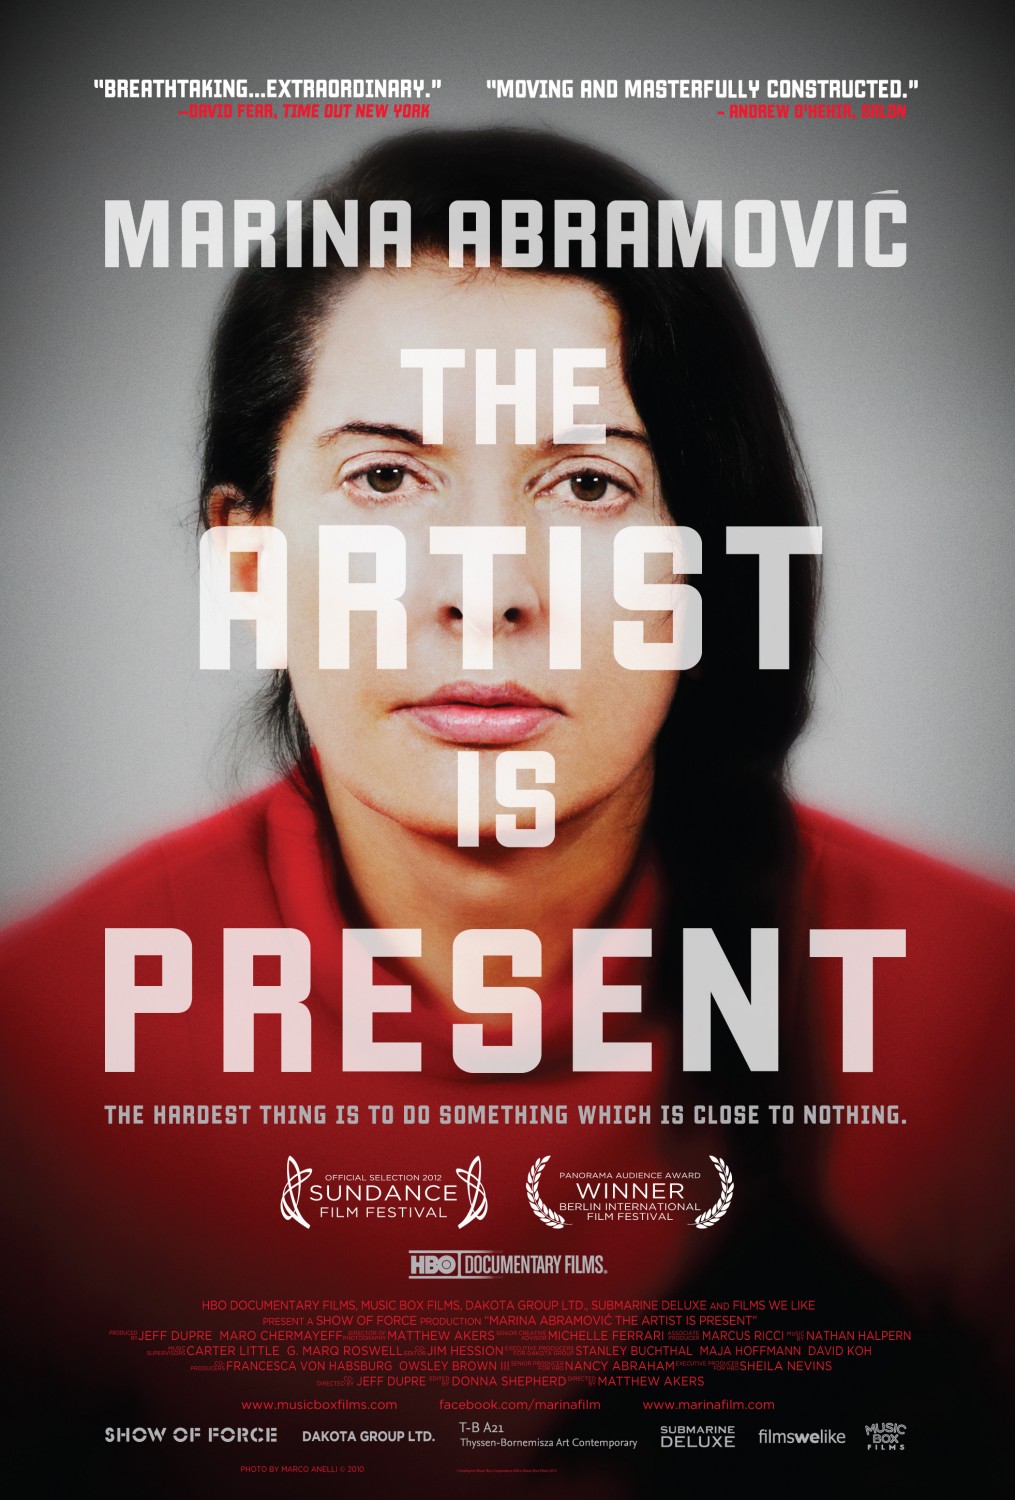 Extra Large Movie Poster Image for Marina Abramovic: The Artist Is Present 